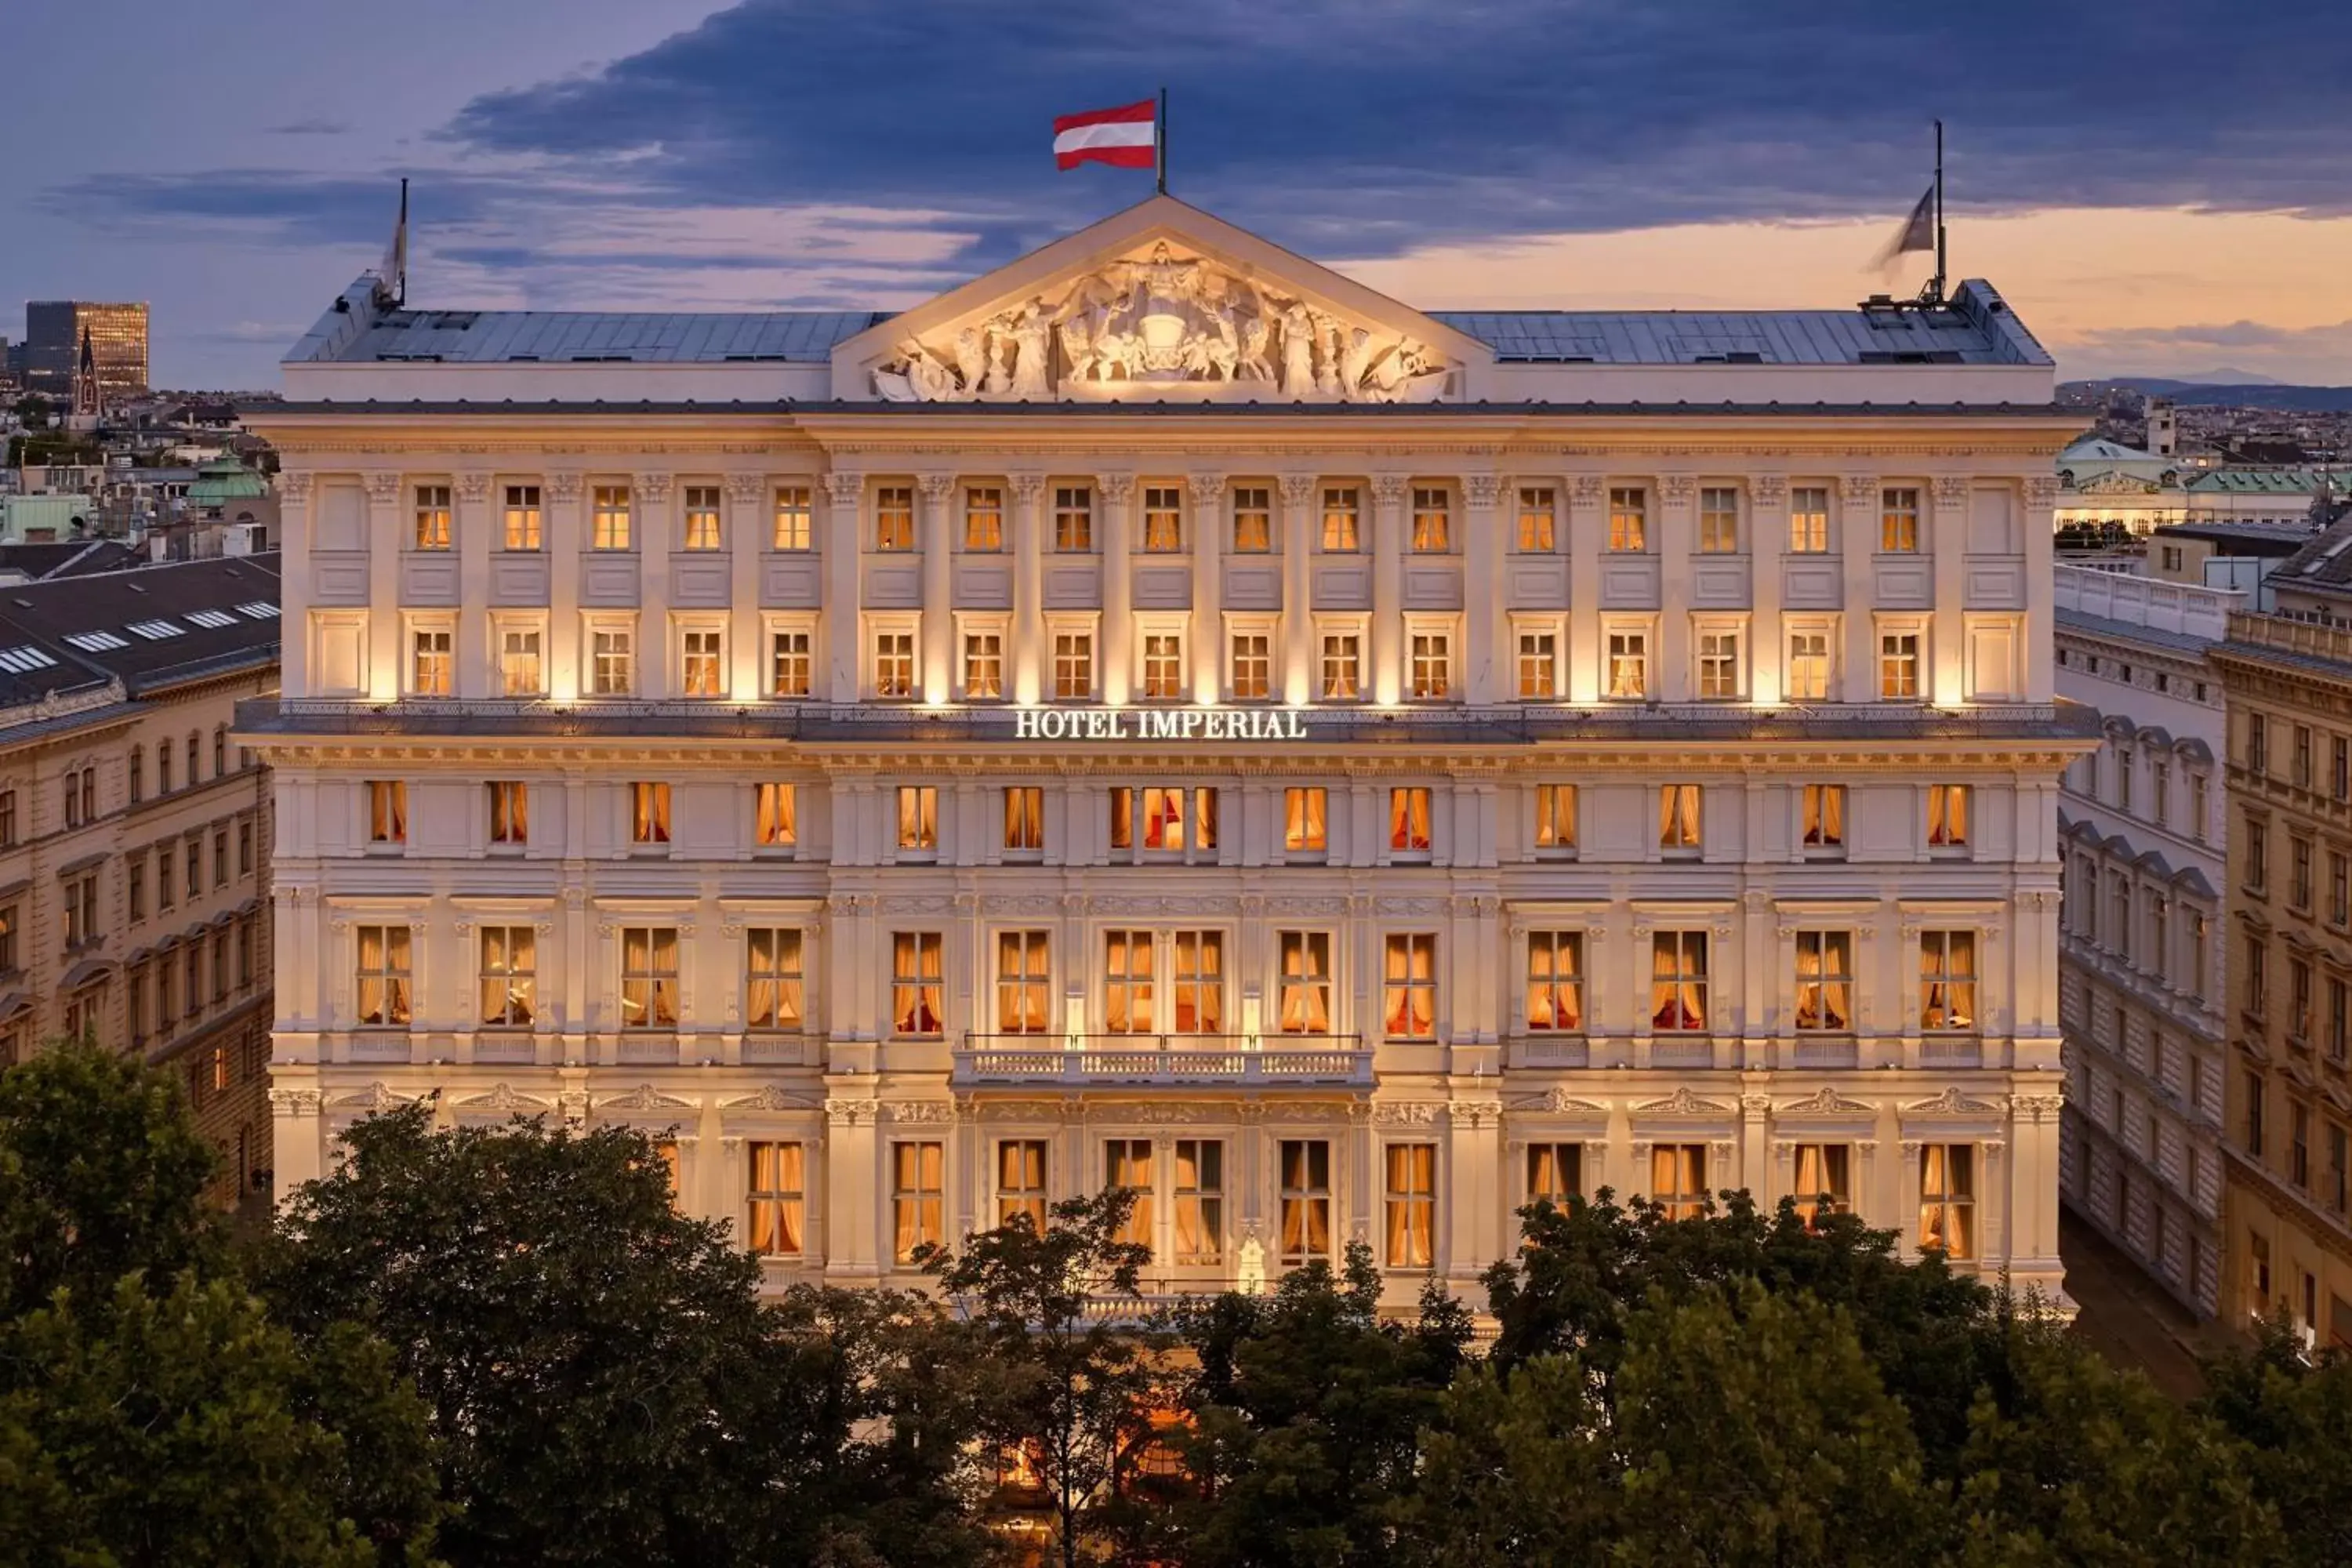 Property Building in Hotel Imperial, a Luxury Collection Hotel, Vienna